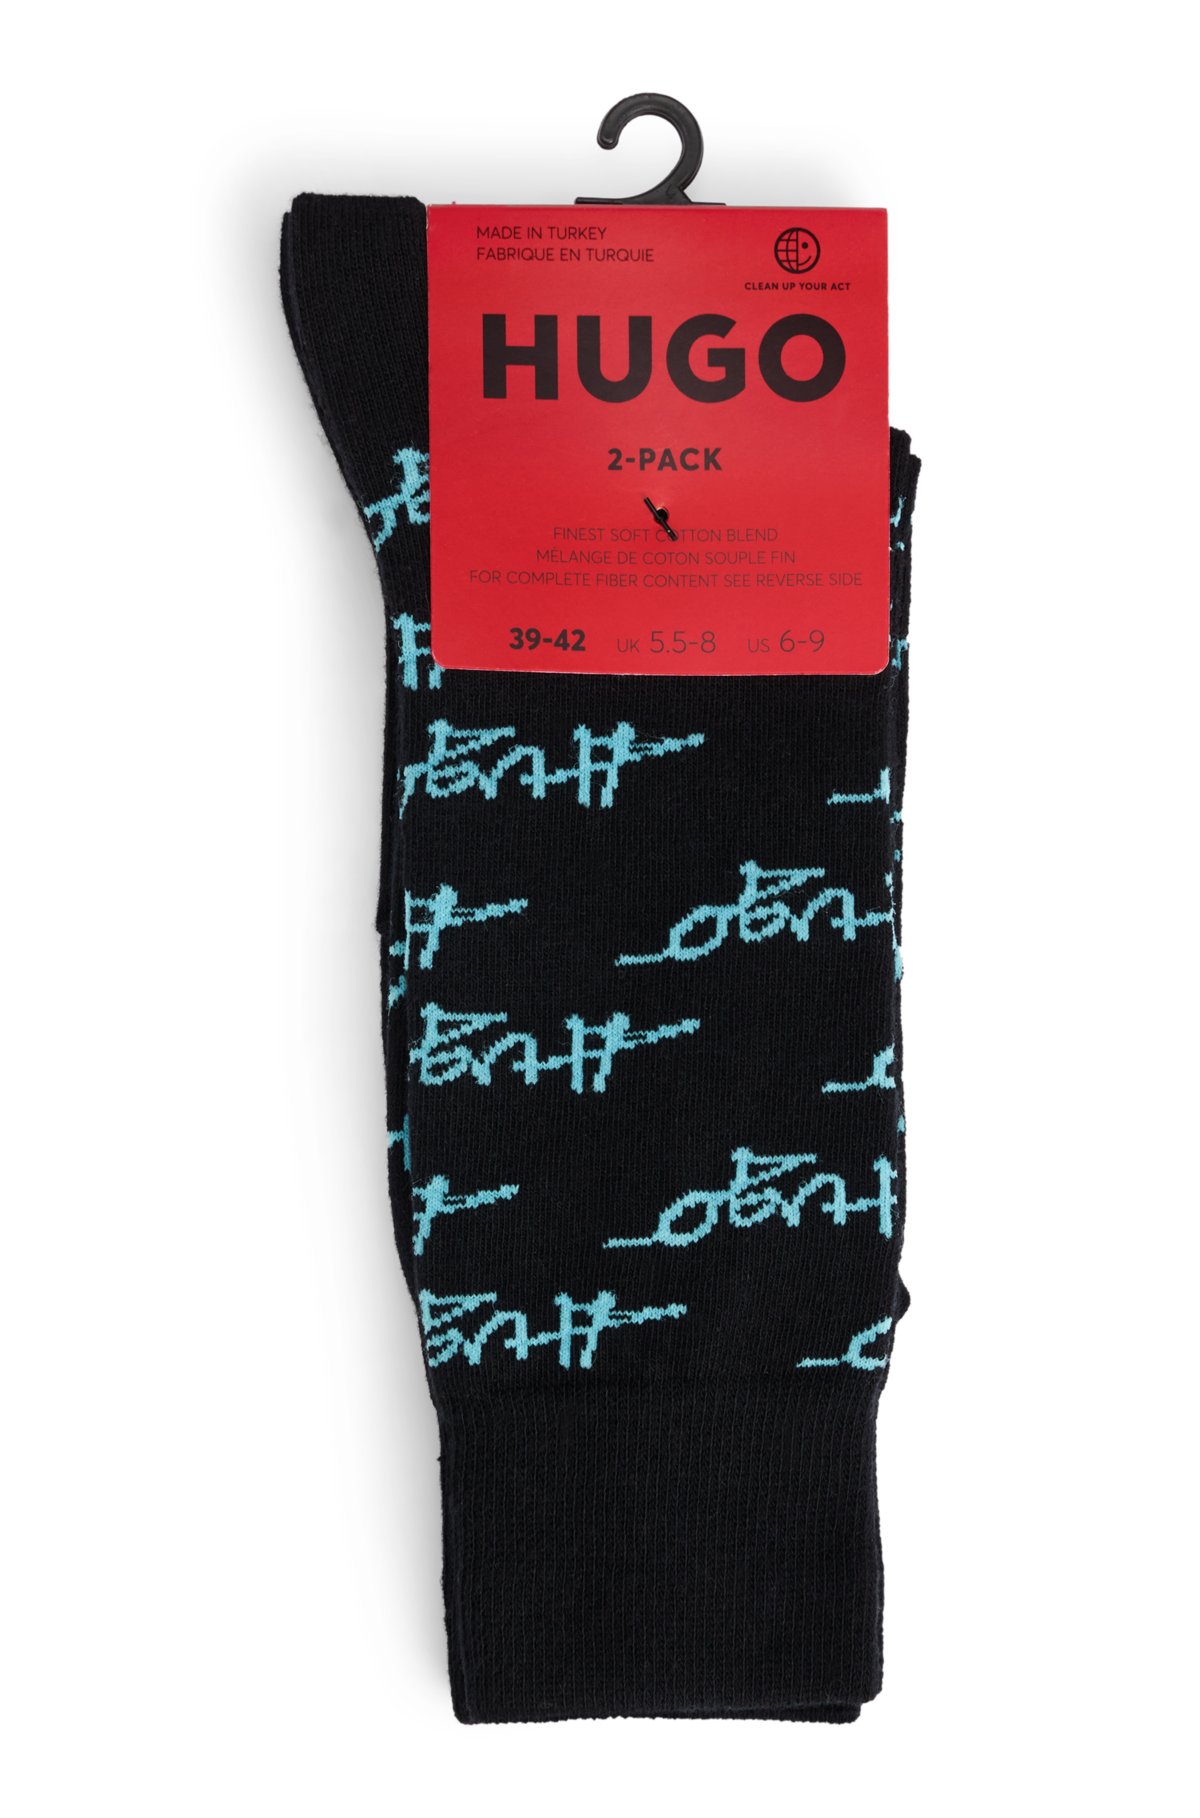 Two-pack of socks in a cotton blend, Black